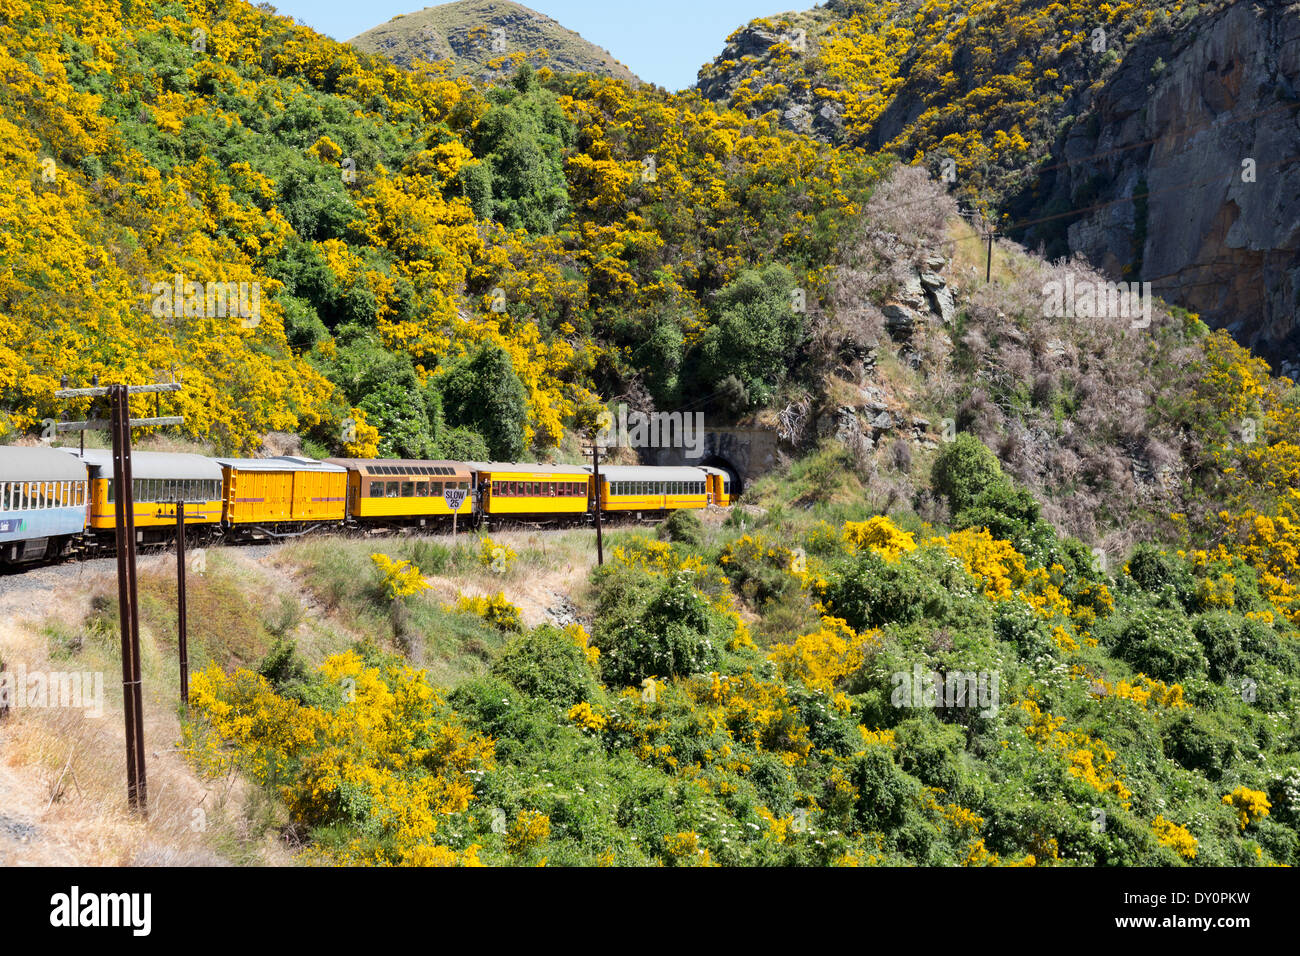 Taieri Gorge tourist railway train runs into a tunnel on its journey up the valley, New Zealand Stock Photo